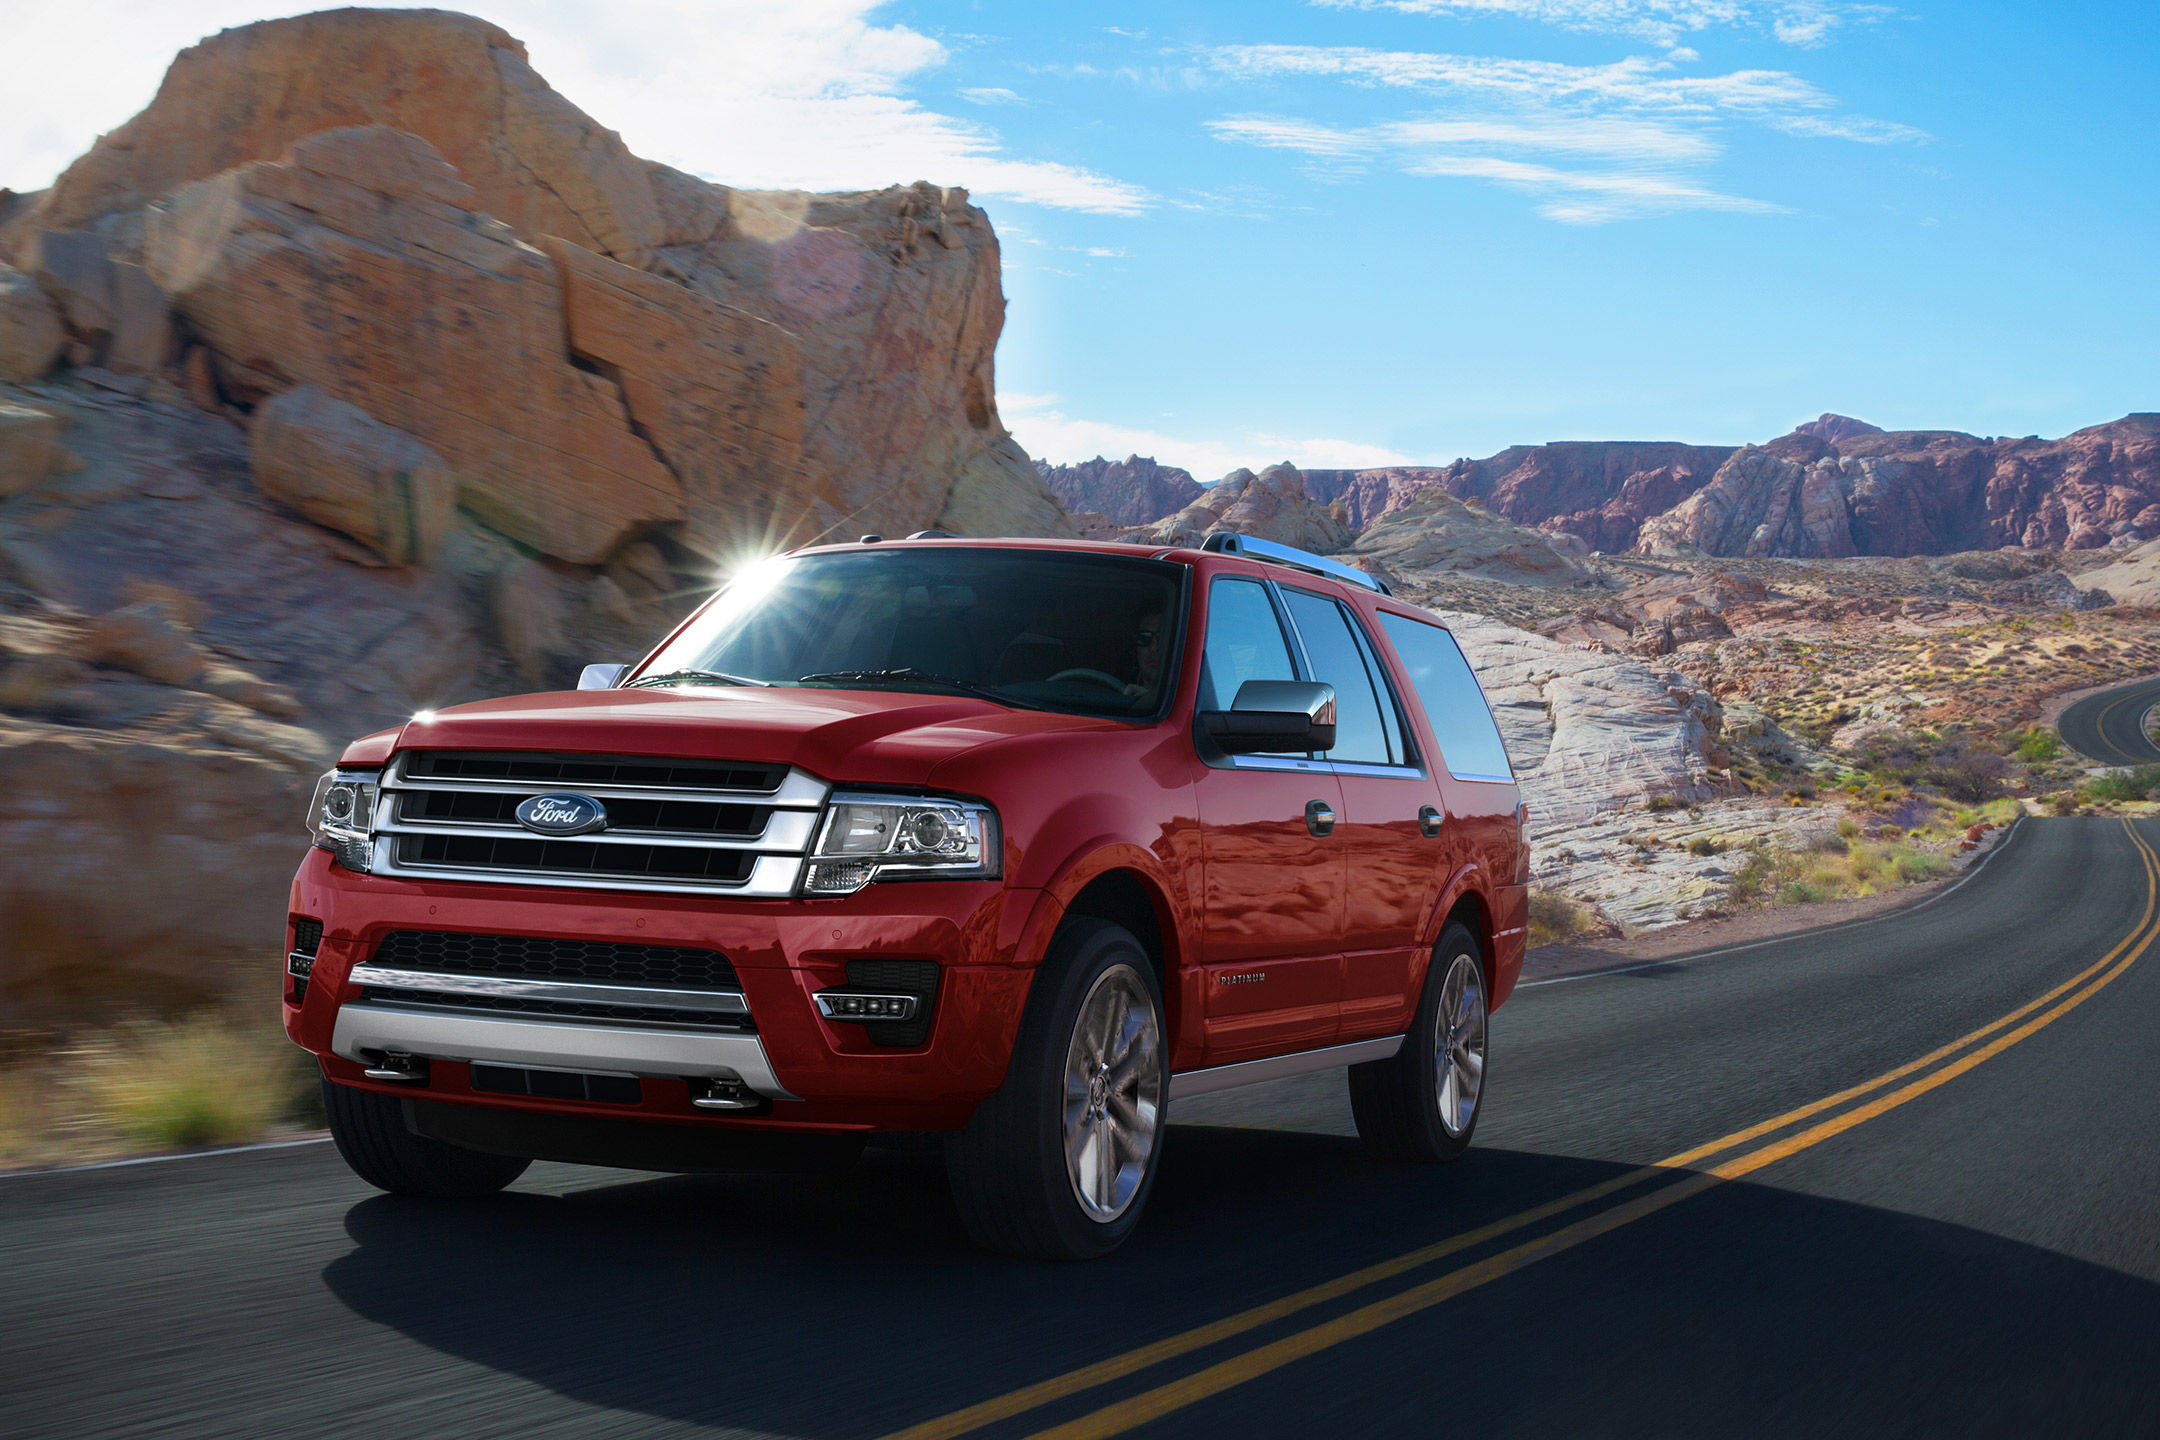 2017 Ford Expedition Overview The News Wheel